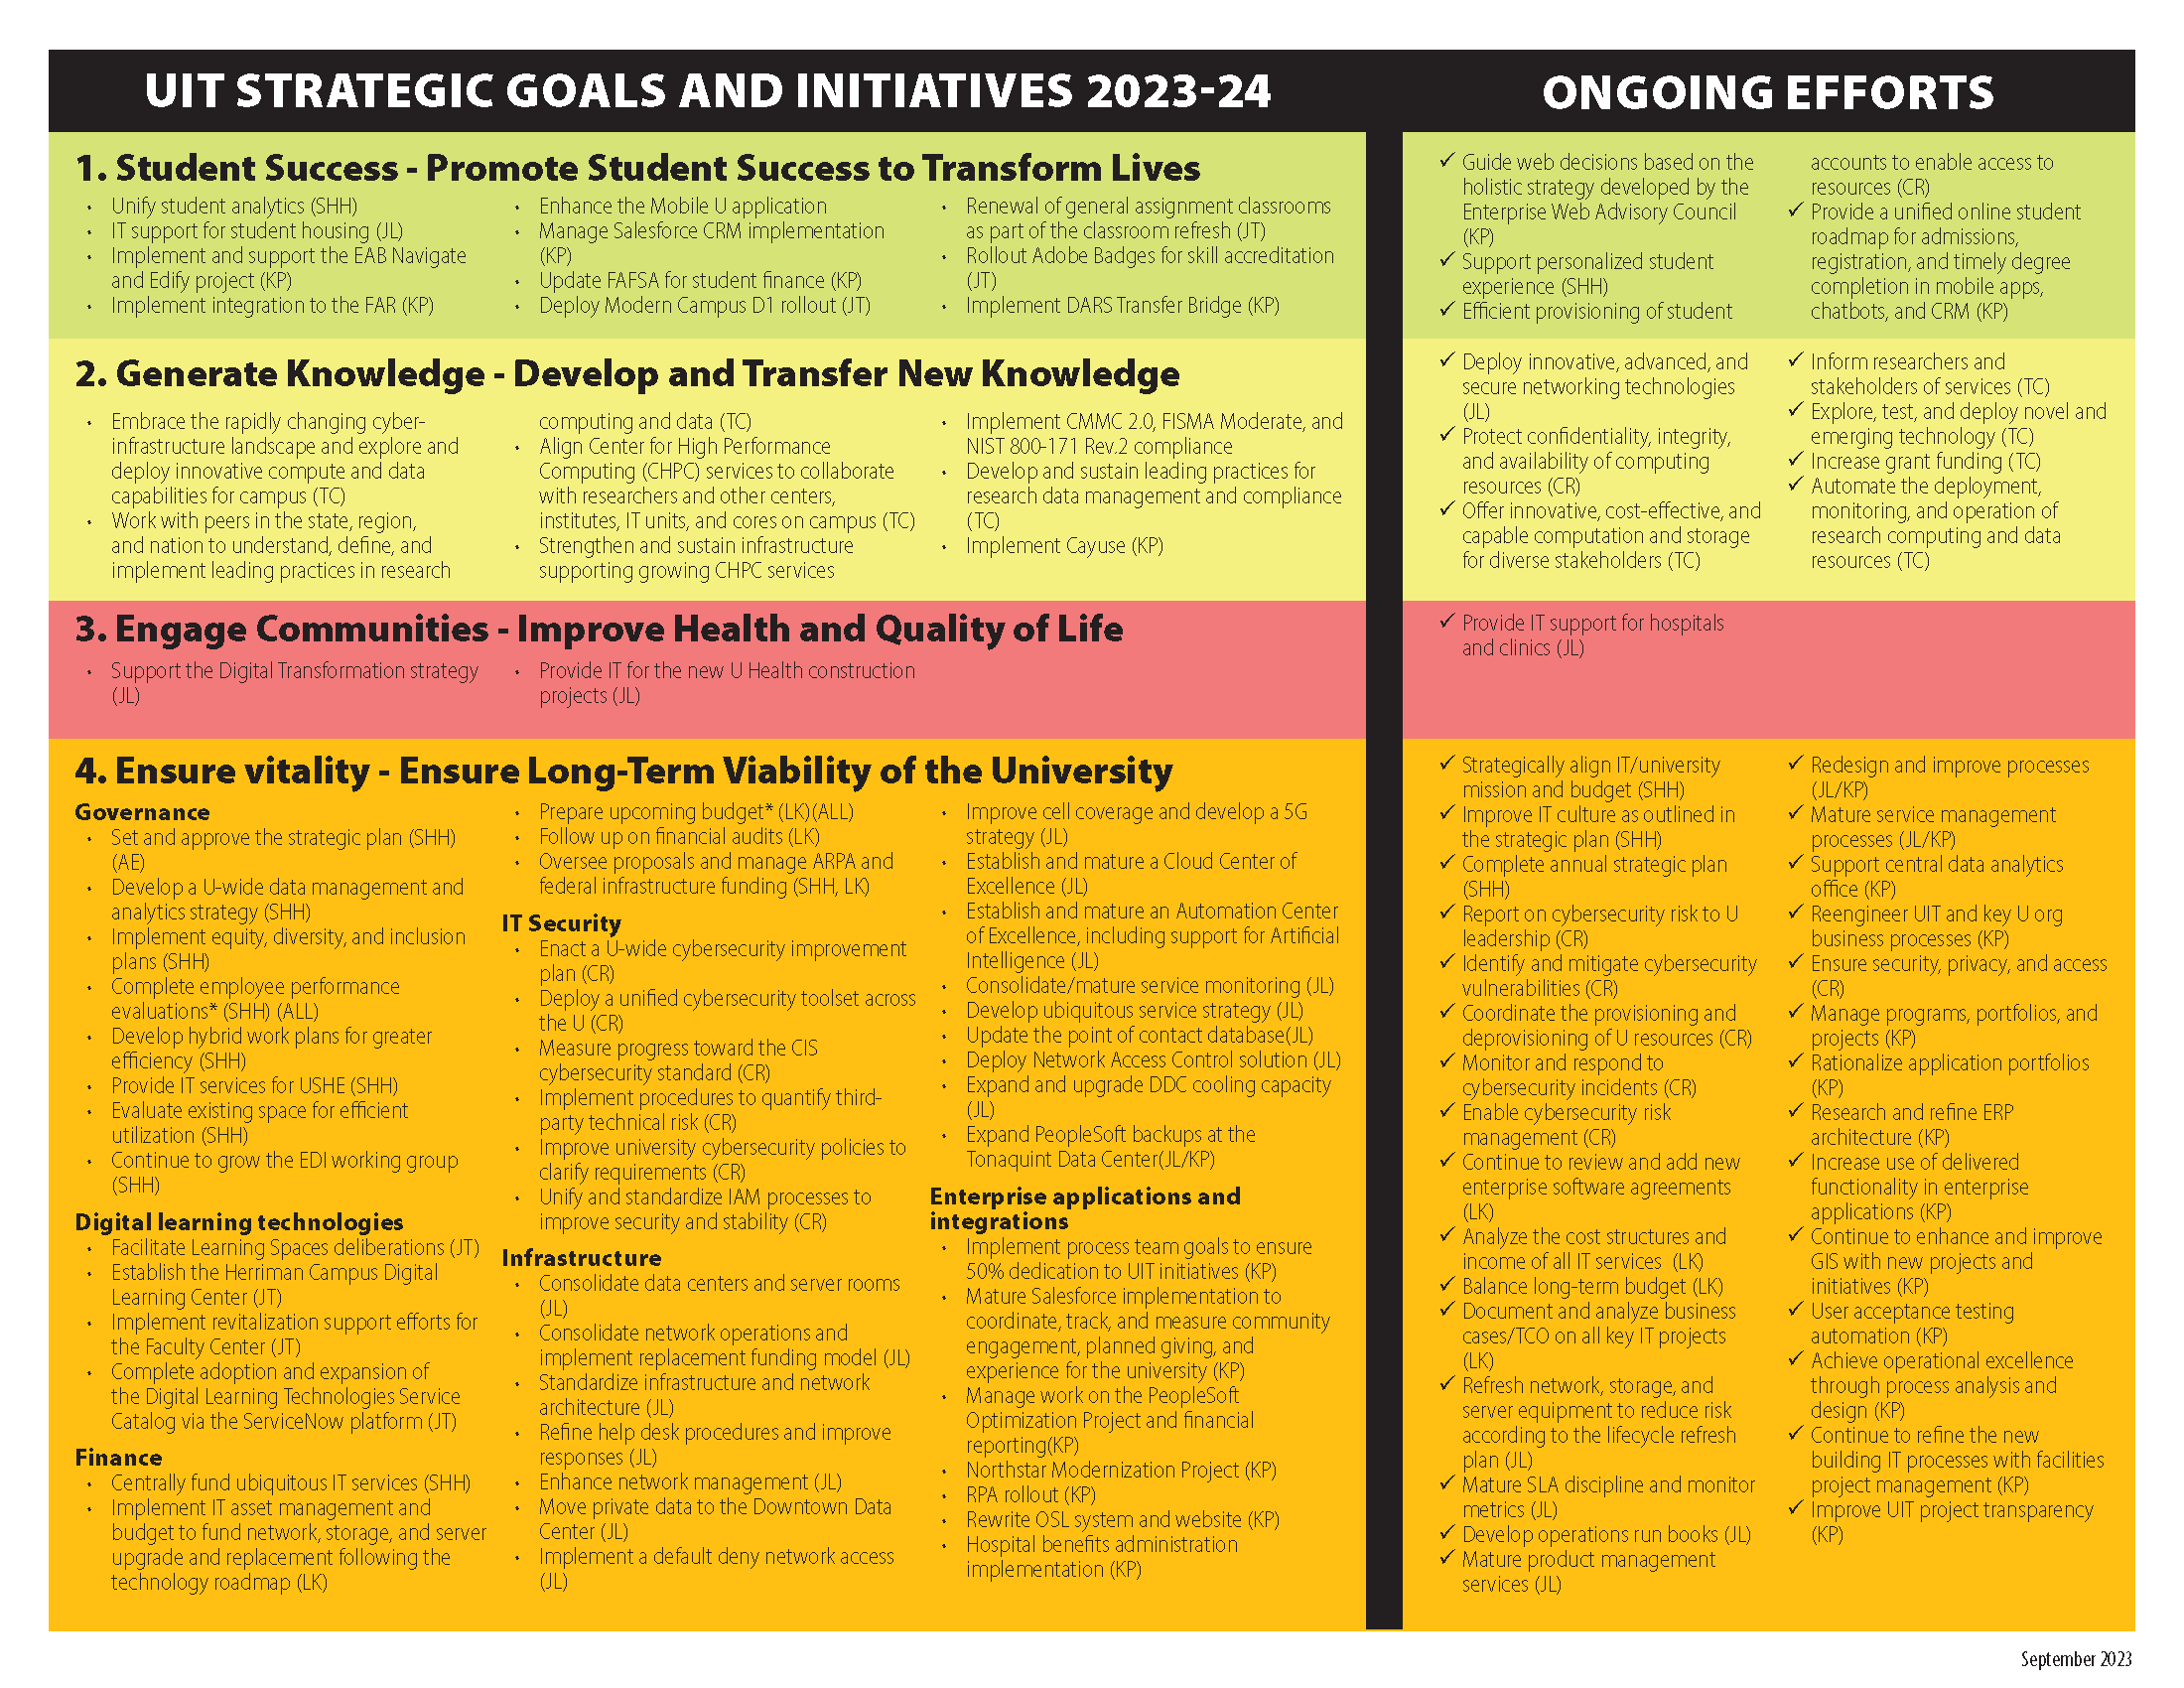 Image of page one of the UIT strategic plan